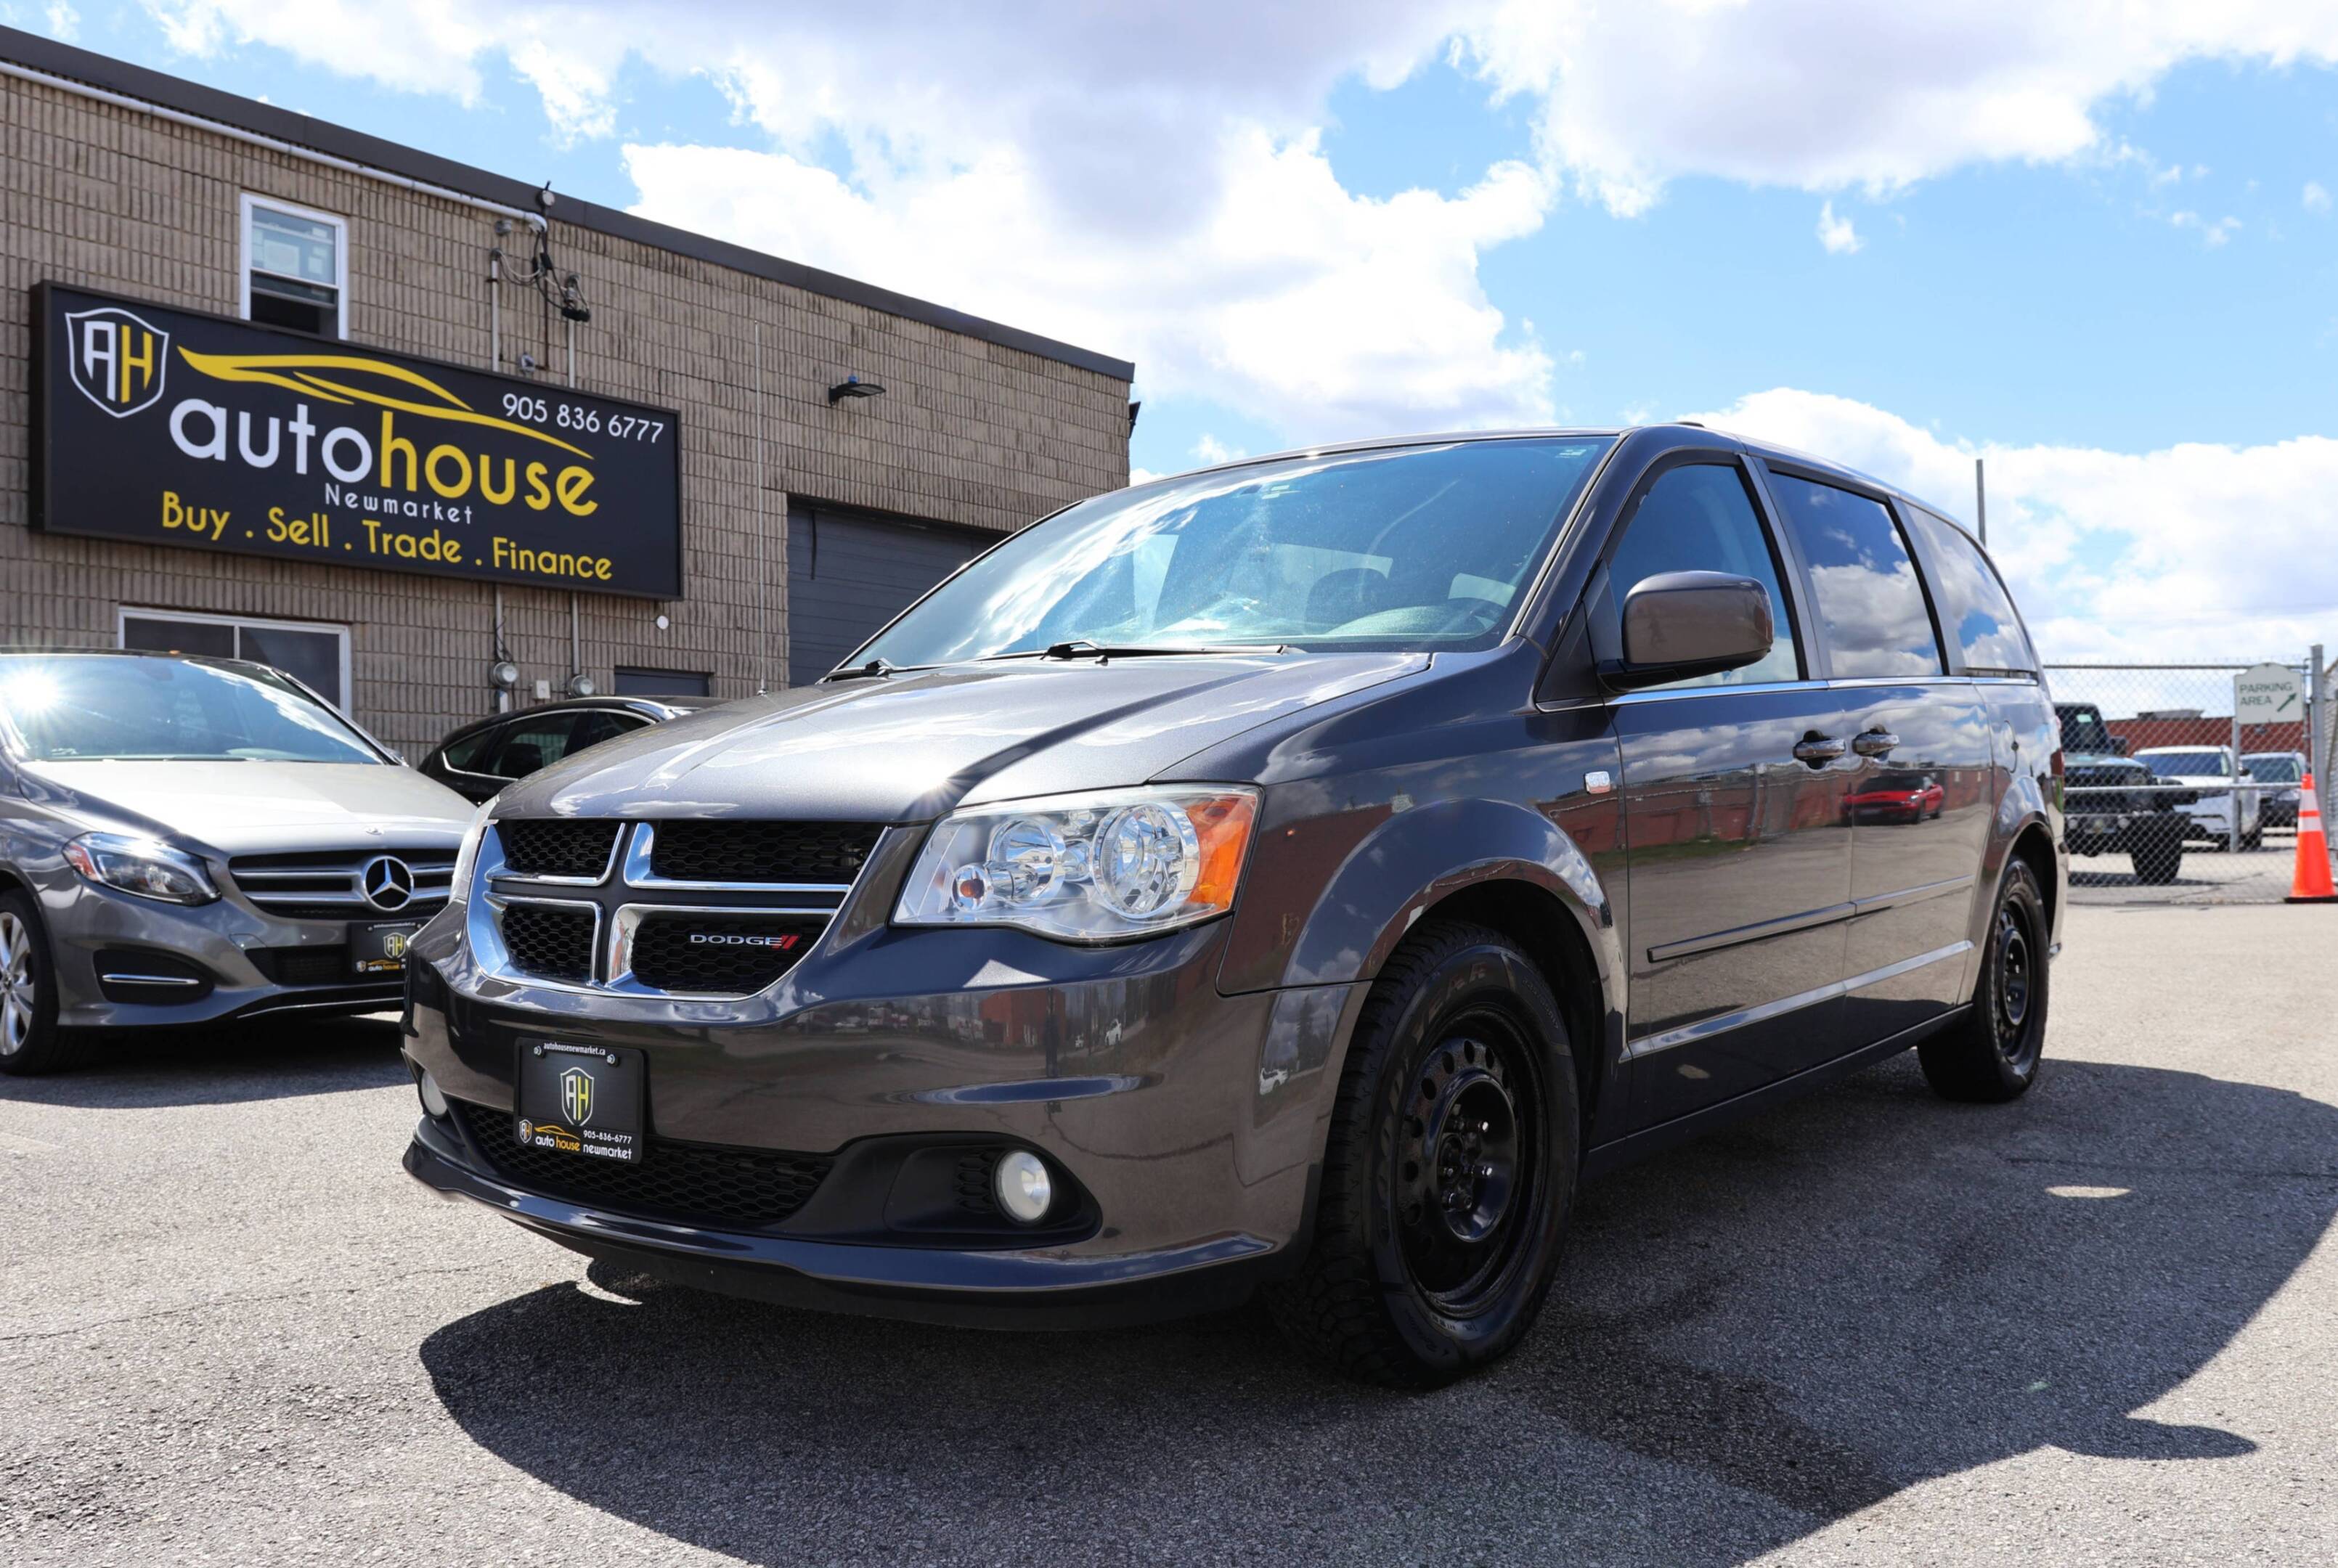 2014 Dodge Grand Caravan 30TH ANNIVERSARY/LEATHER/POWER SEAT/BACK UP CAM/ST